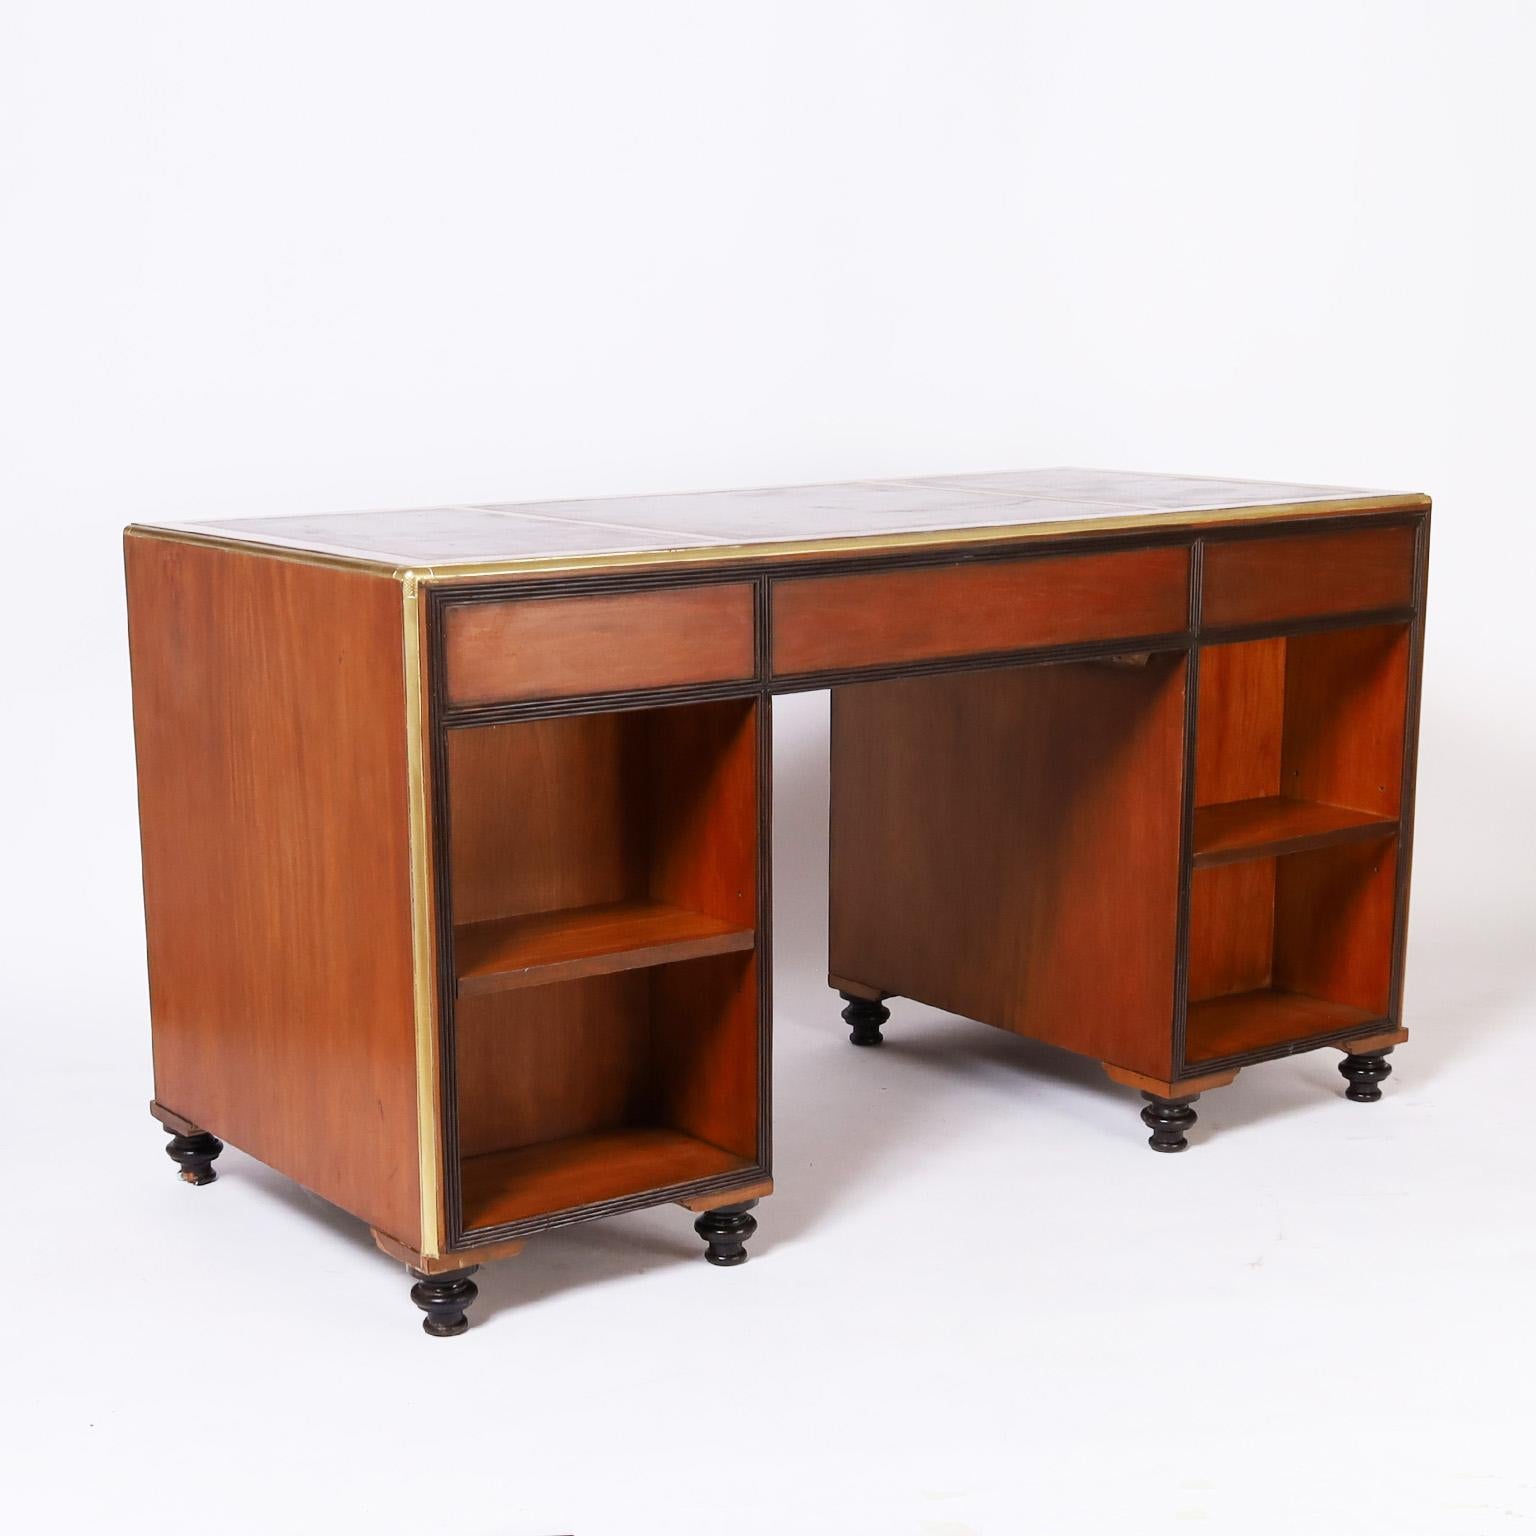 Mahogany Campaign Style Leather Top Desk by Baker